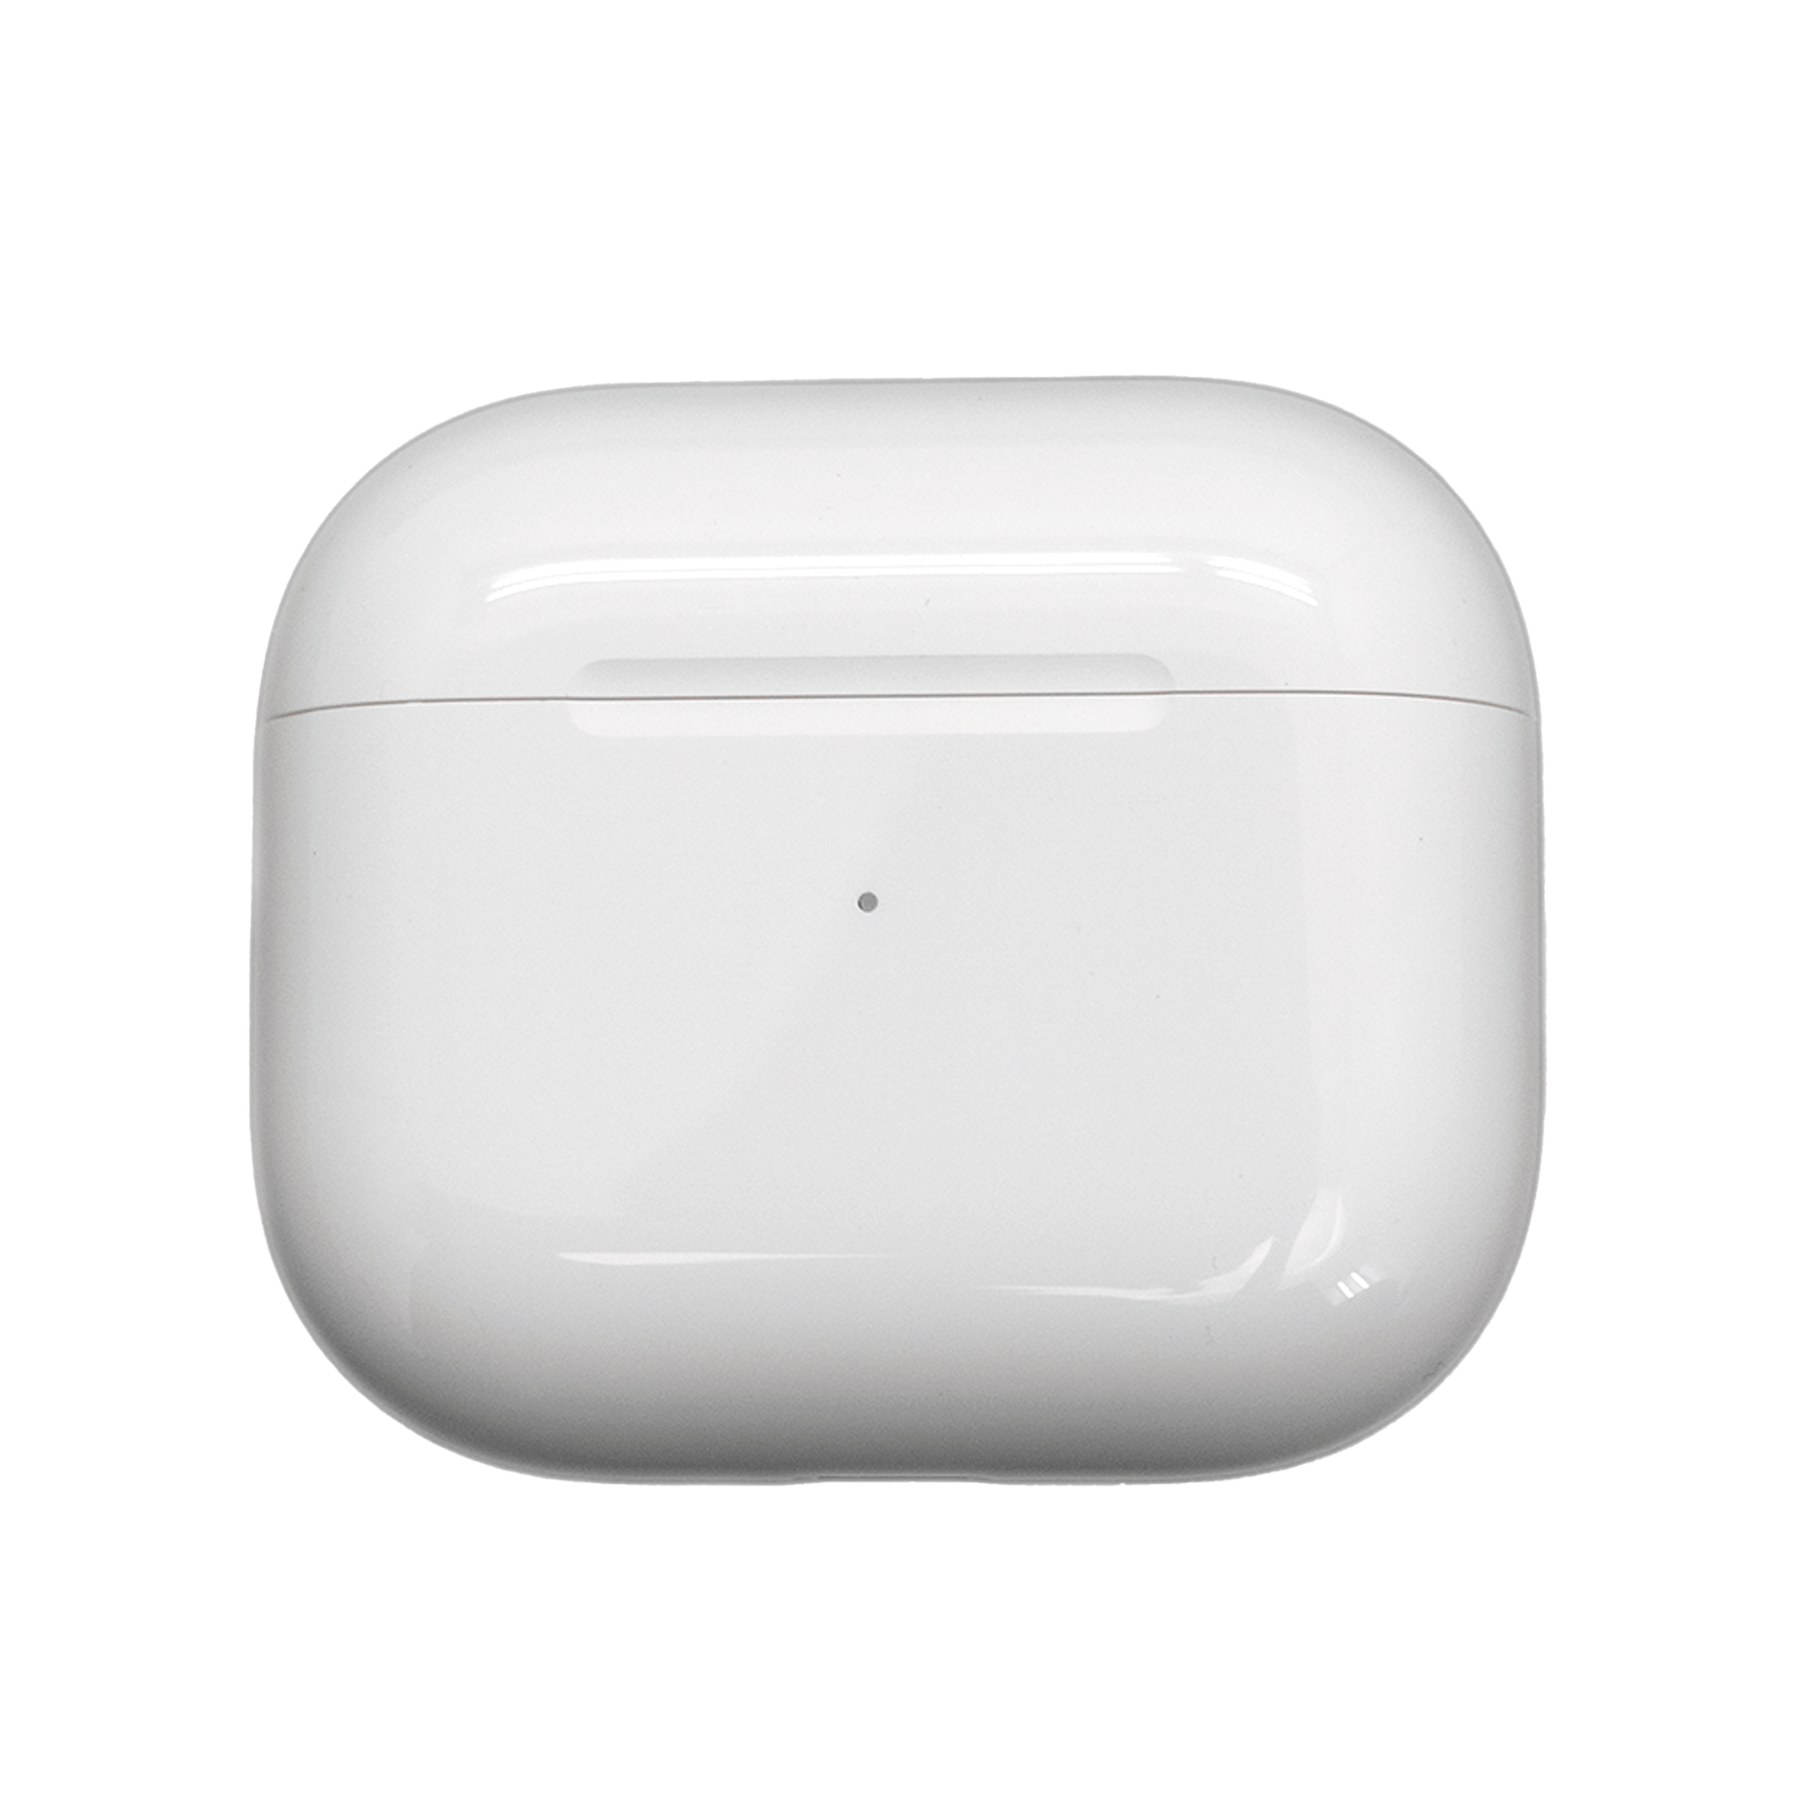 APPLE AIRPODS (3RD GENERATION) BLUETOOTH WIRELESS EARPHONE CHARGING CASE -  WHITE